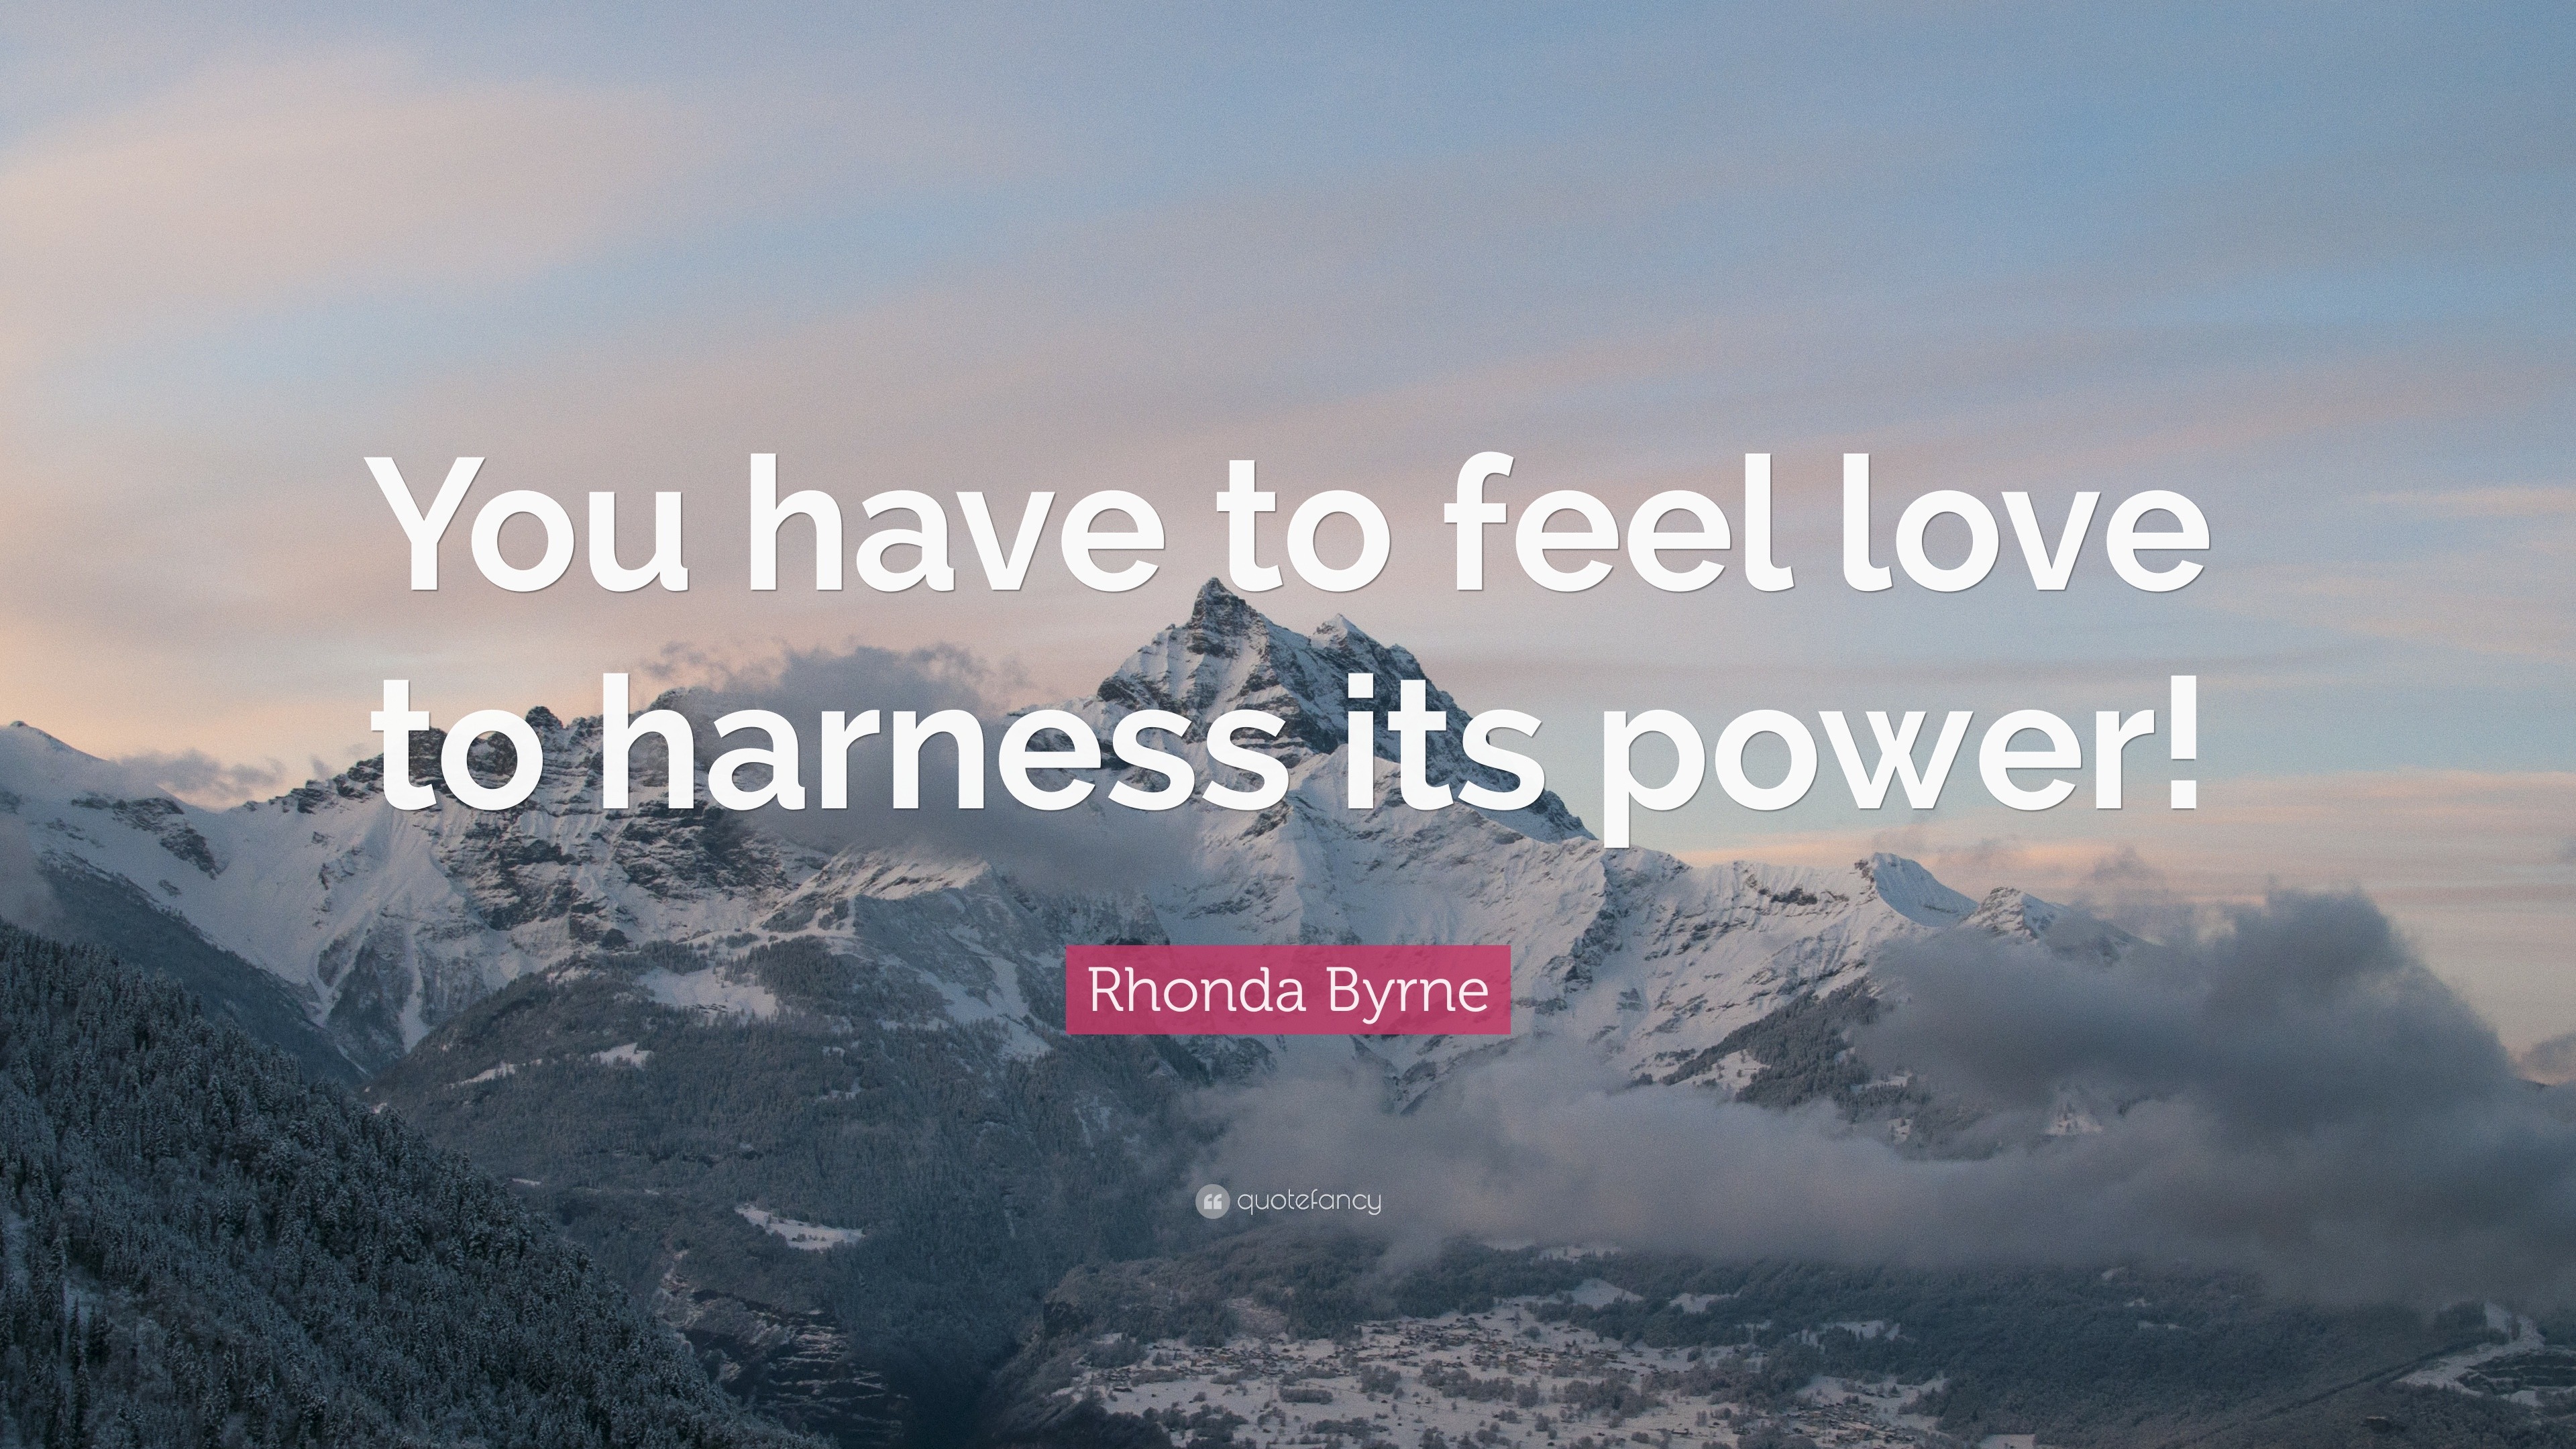 Rhonda Byrne Quote: “You have to feel love to harness its power!”